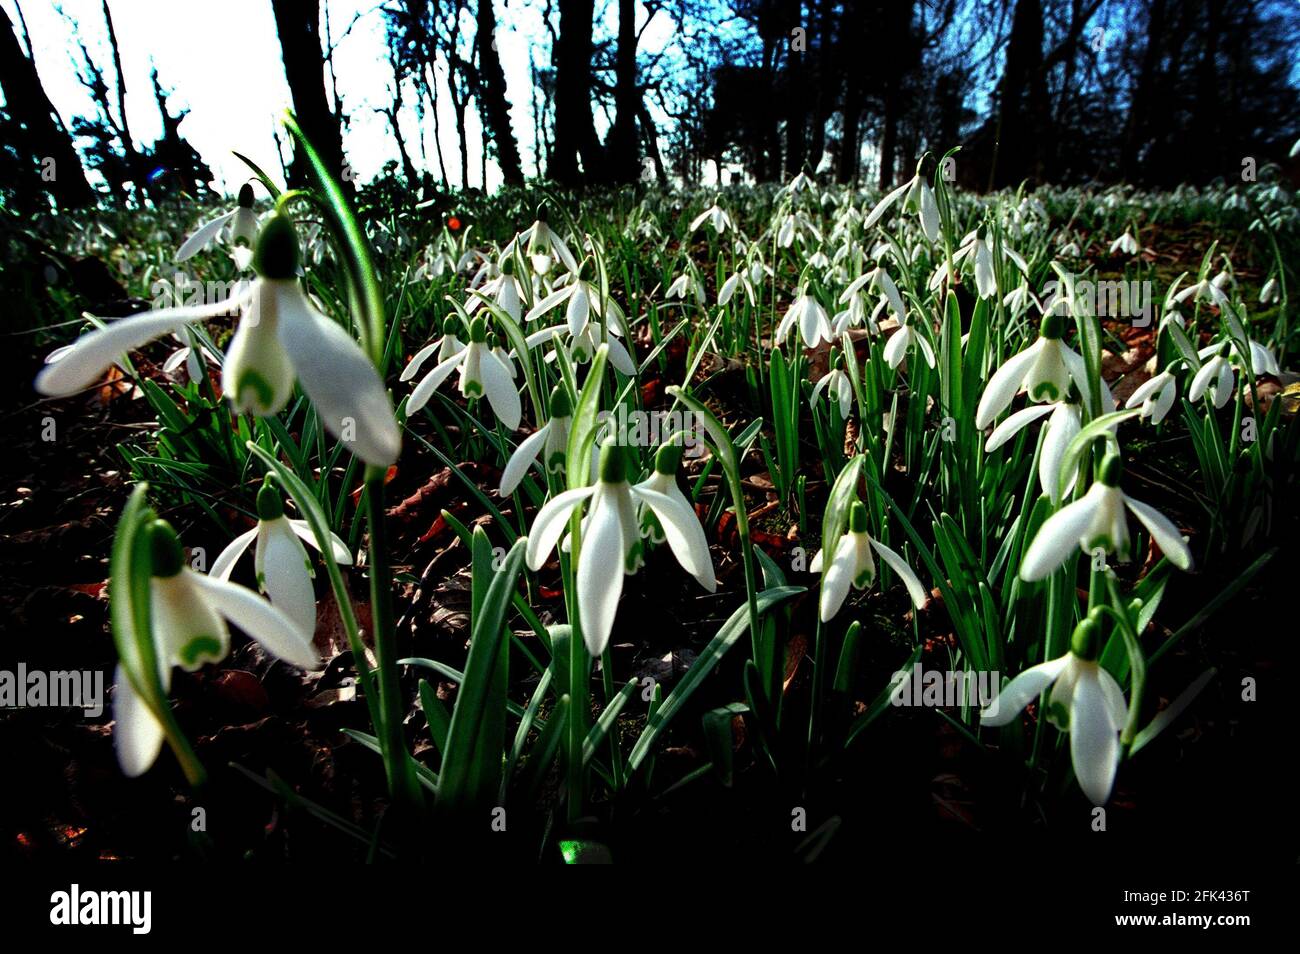 Snowdrops bloom in the grounds of Easton Lodge 1998The Gardens of Easton Lodge Great Dunmow Essex which were allowed to fall into disrepair after the countess of Warwick died in 1938  and the surrounding parkland was turned into a USAF airbase The house and Italian style  garden by Harold Peto were abandoned in the 1950s The Present owners Brian and Diana Creasey have spent the last five years restoring the 17th century   woodland area with snowdrops Stock Photo